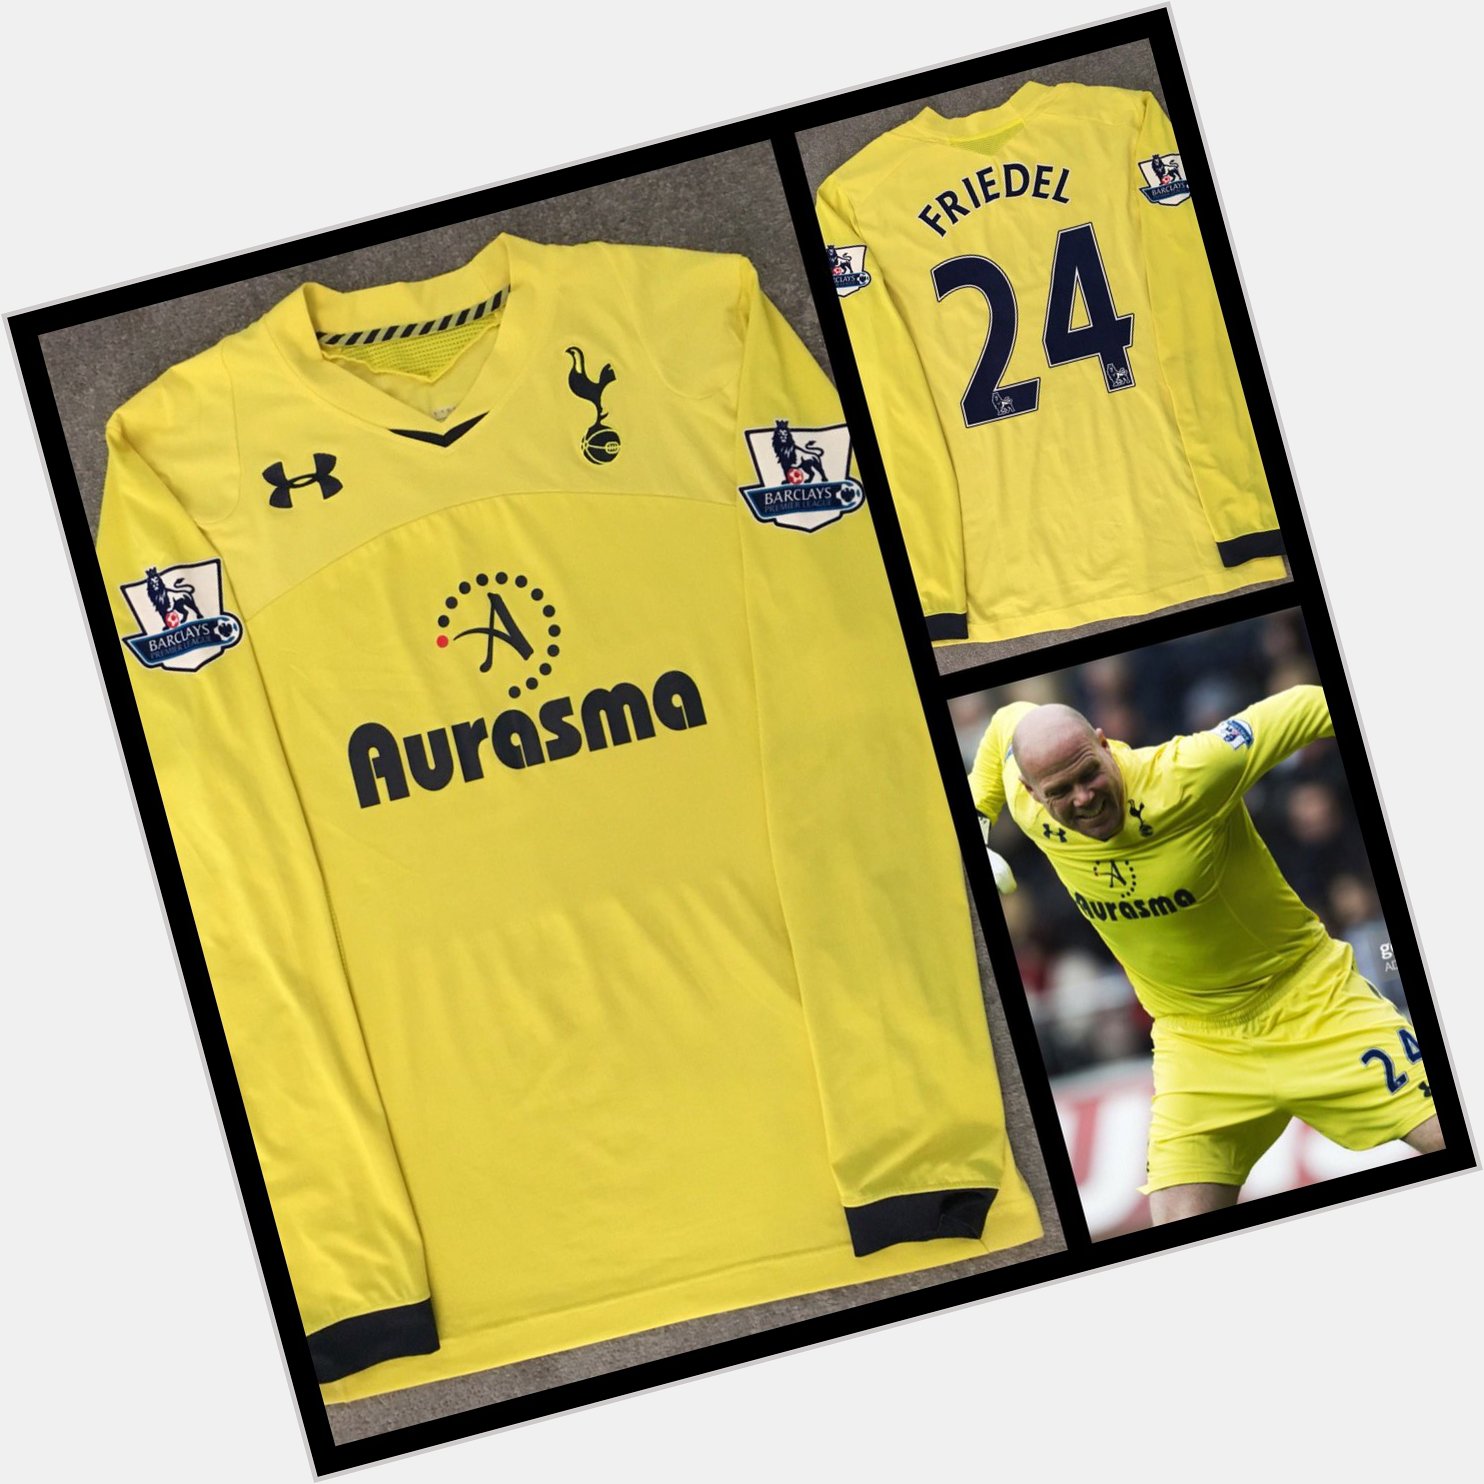 Happy 48th Birthday Brad Friedel. Here s another of his match worn shirts from the 2012/3 season. 